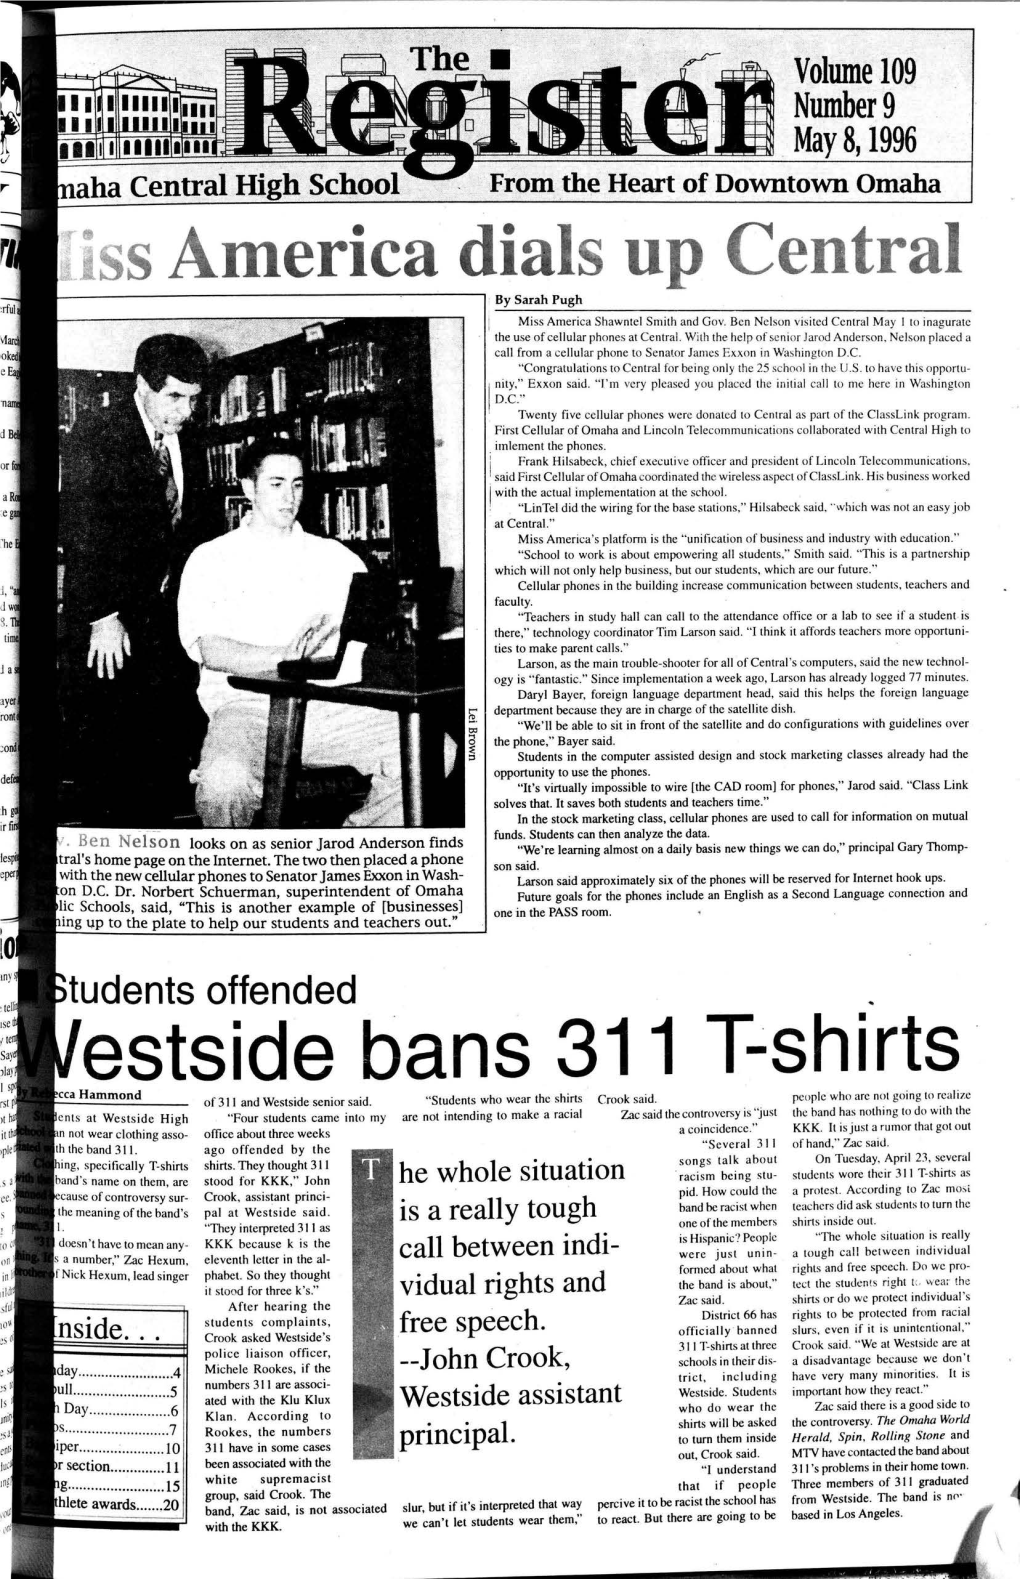 Estside Bans 311 T-Shirts People Who Are Not Going to Realize of 311 and Westside Senior Said